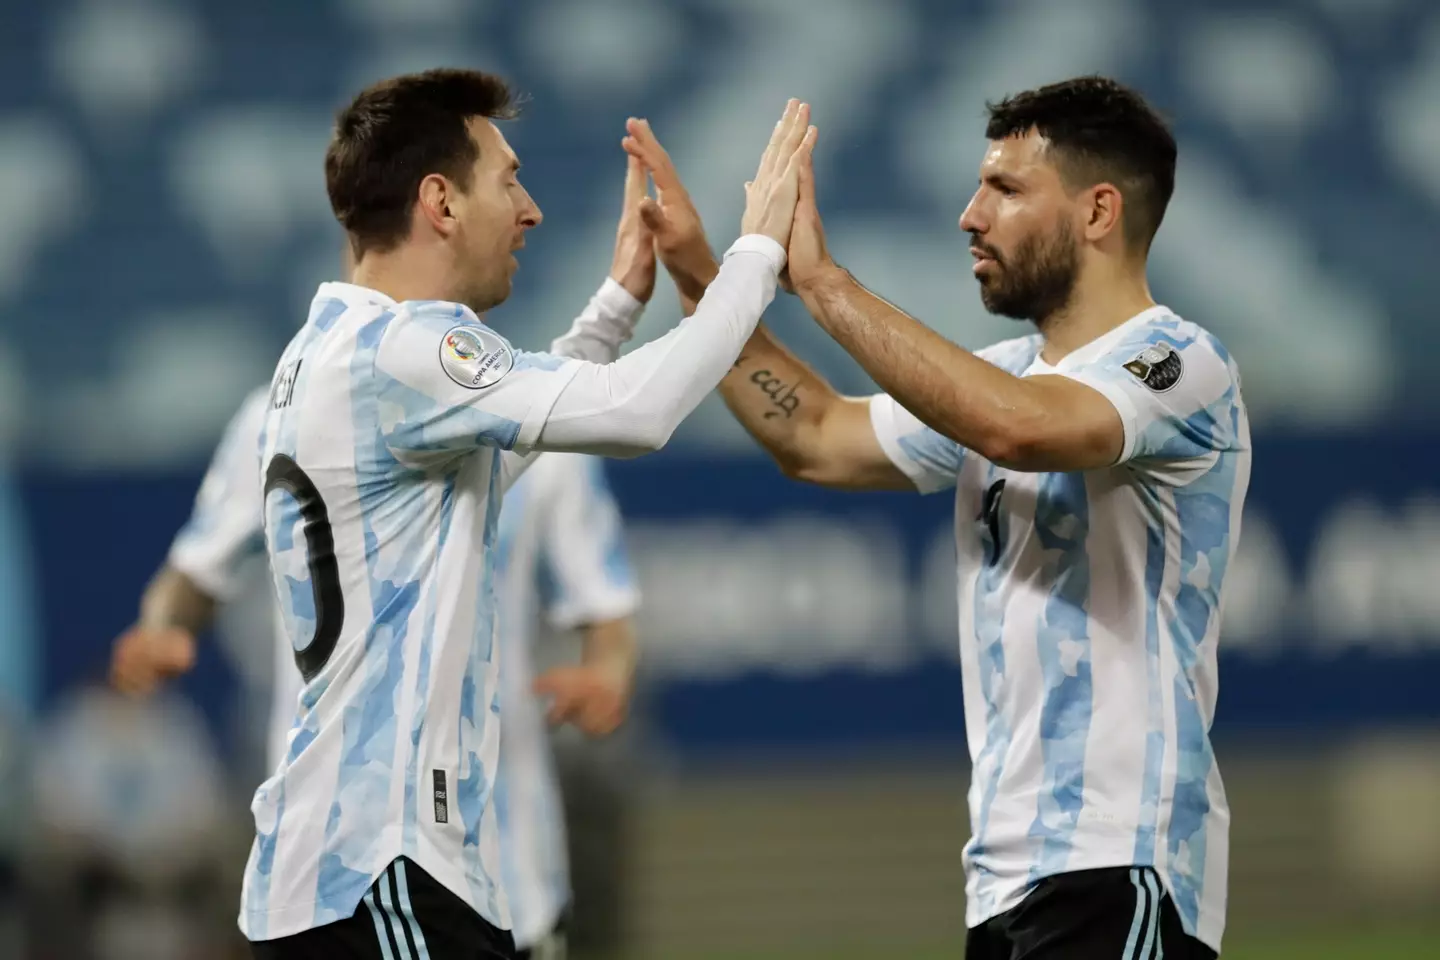 Aguero and Messi celebrate for the national team together. Image: PA Images